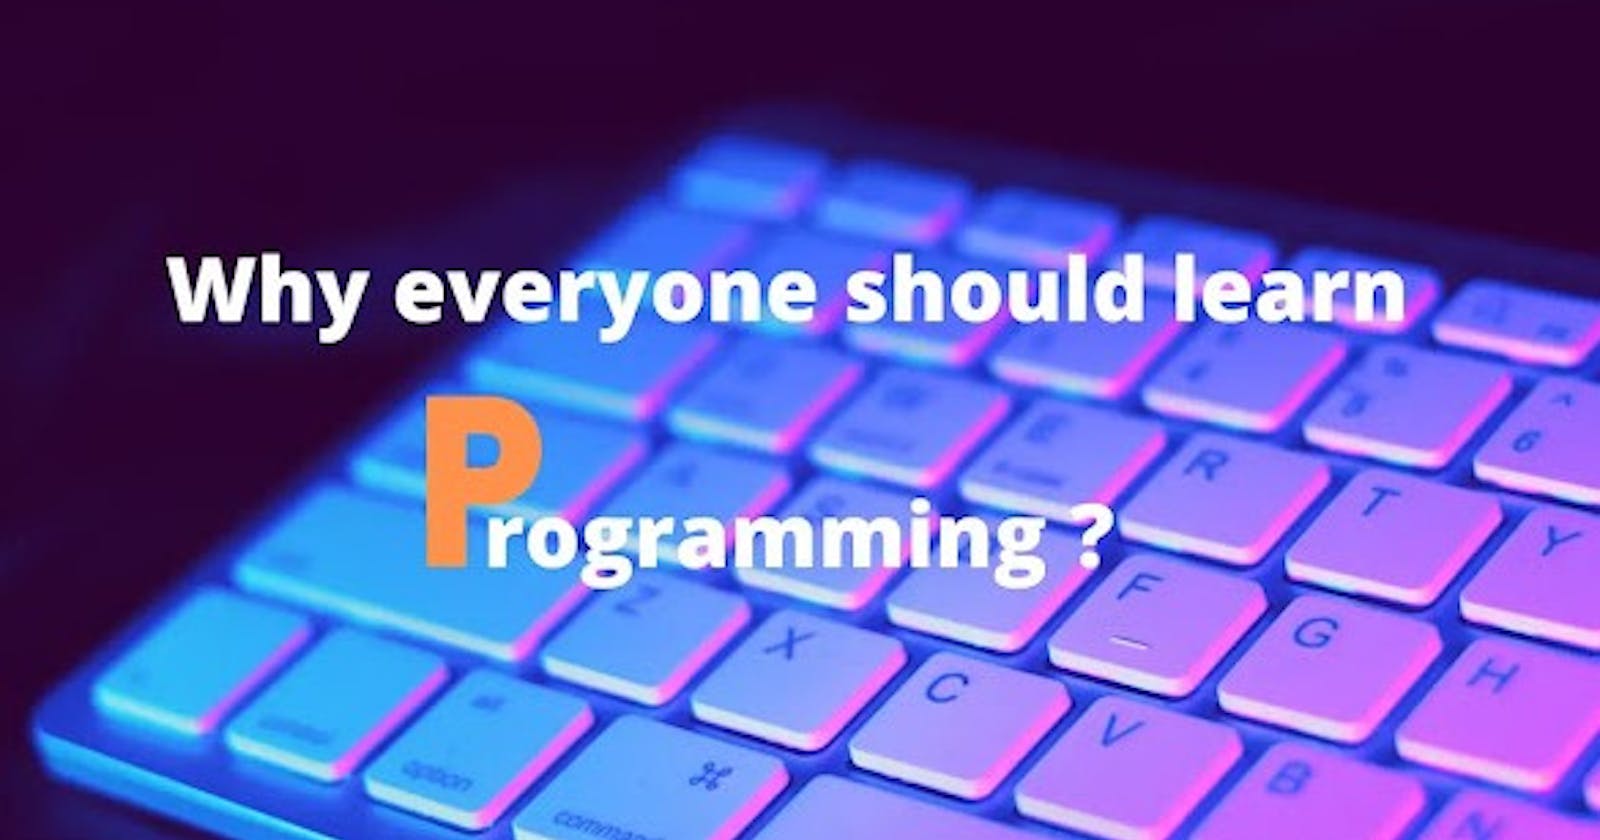 Why everyone should learn programming?